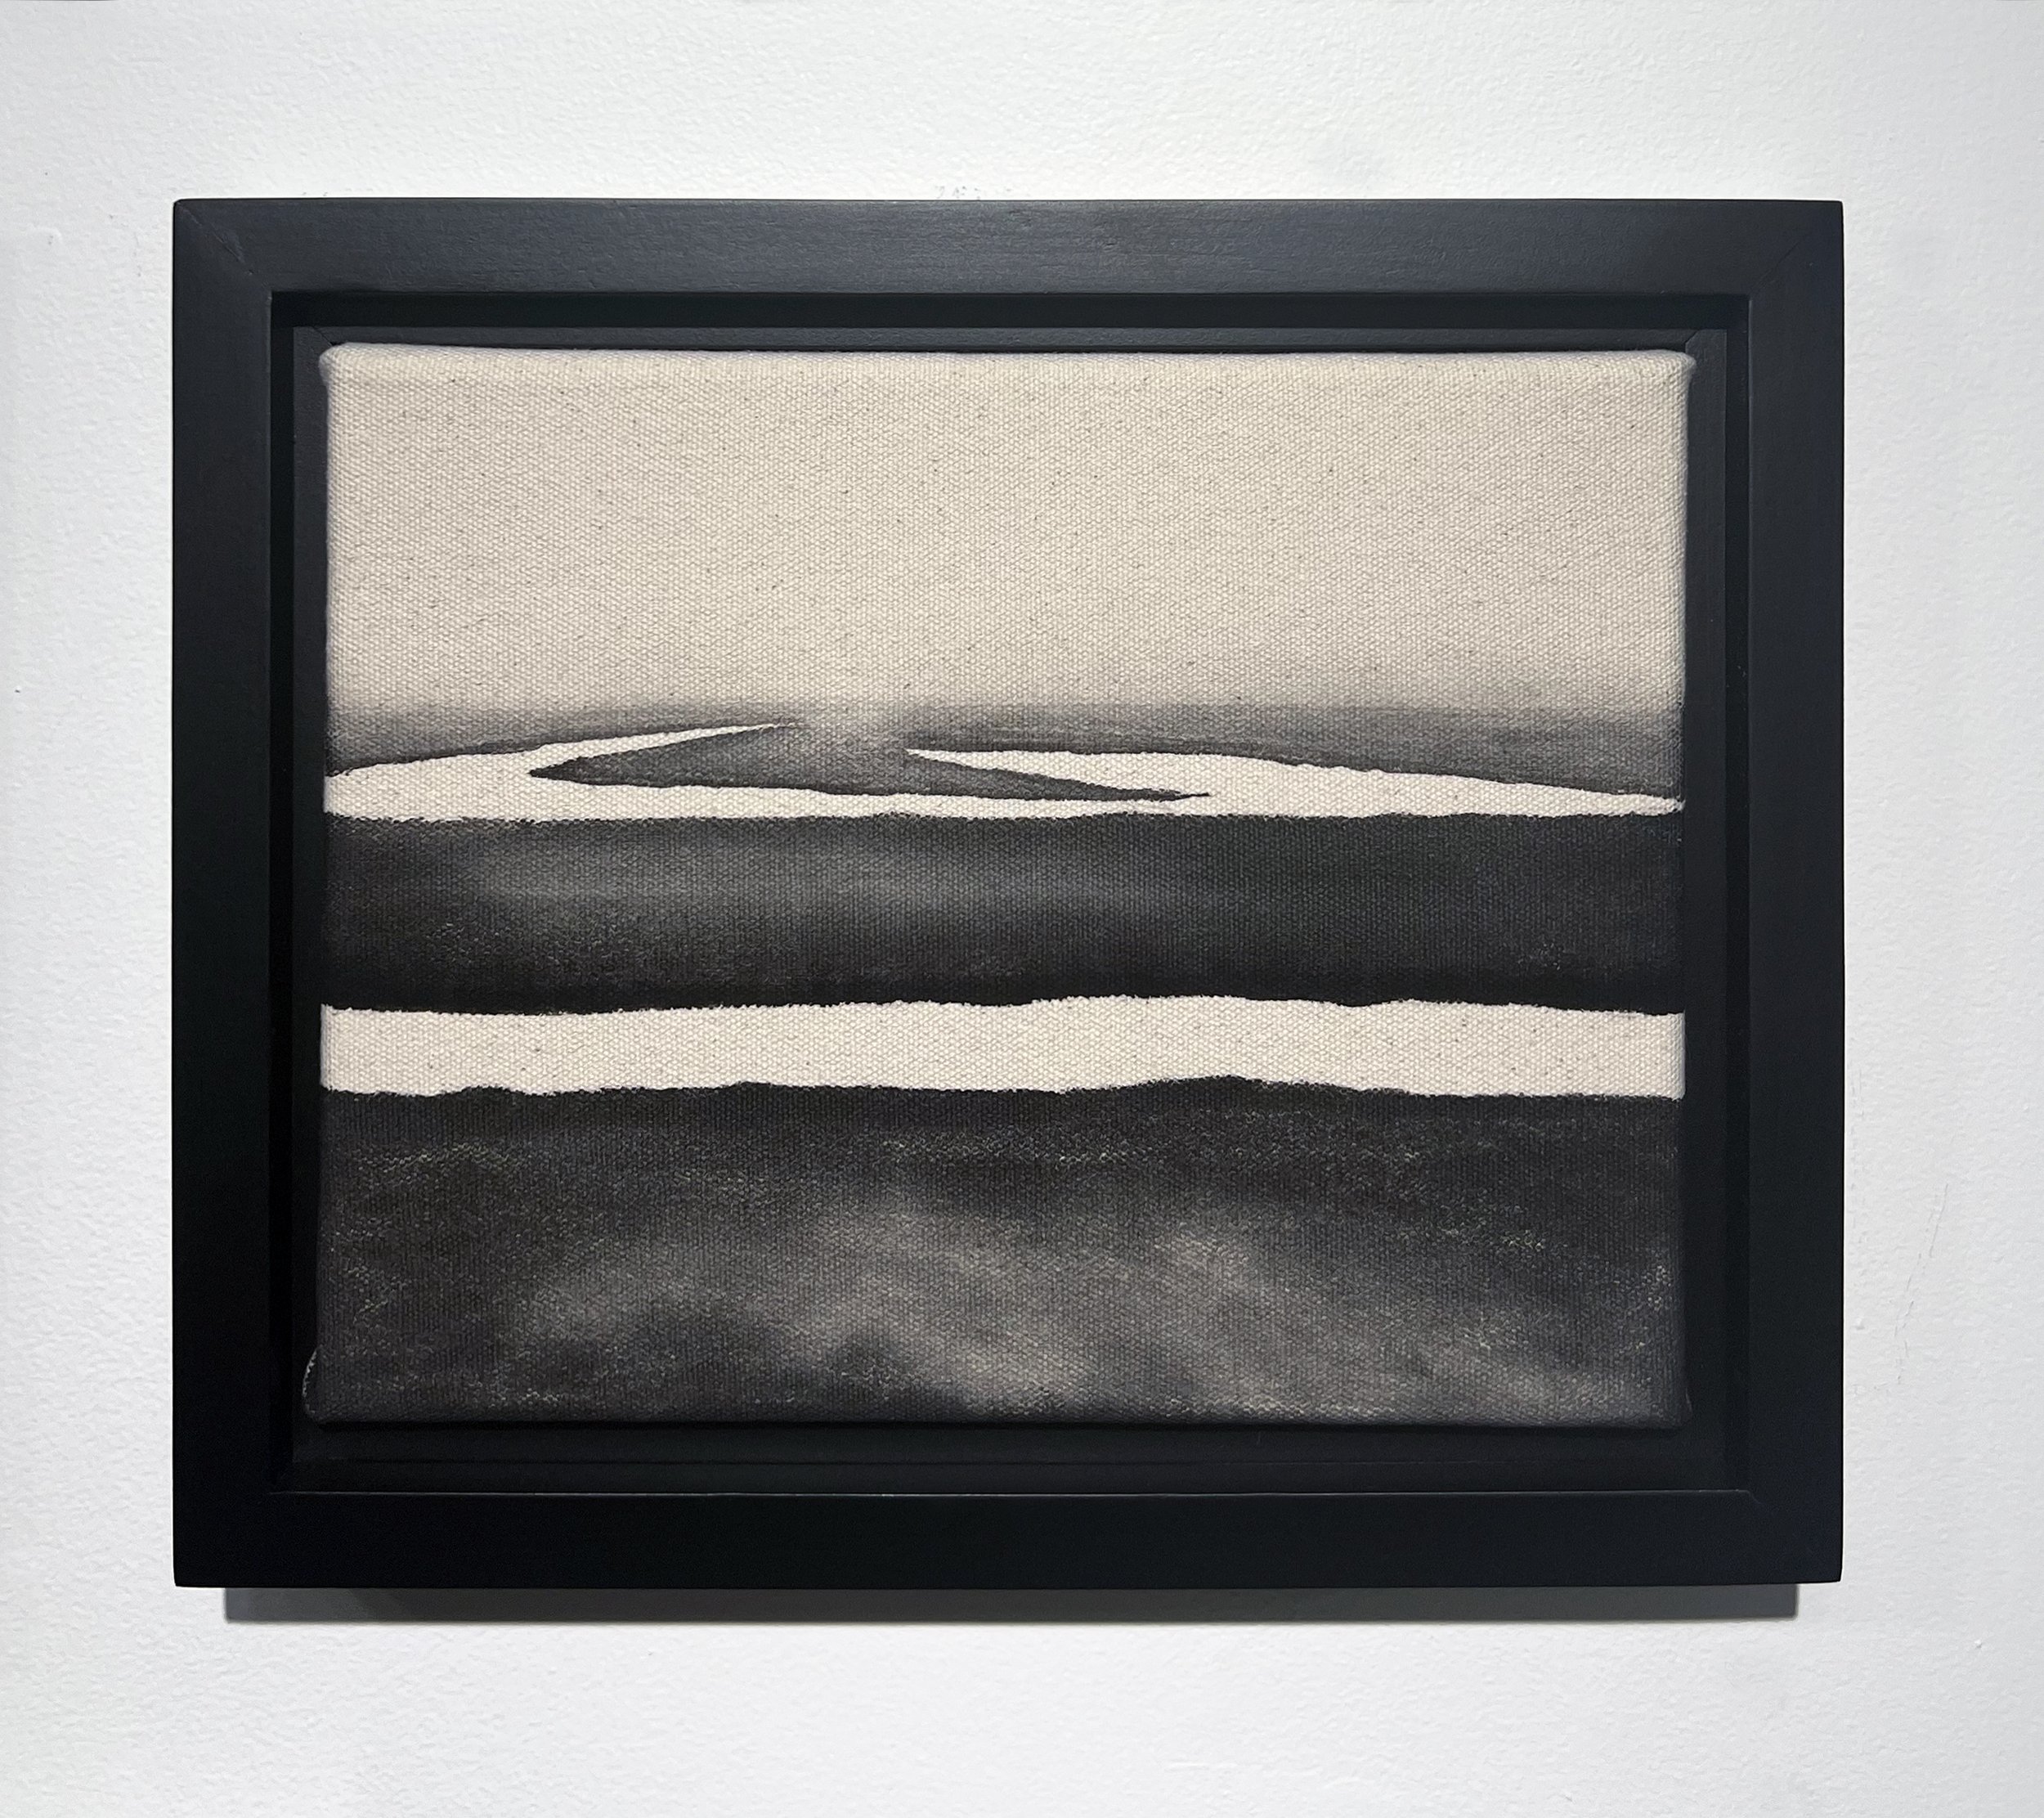   Untitled (wet land) , from Transcendental Series, 2022 Black gesso on raw canvas 8 x 10 inches (20.3cm x 25.4cm) 